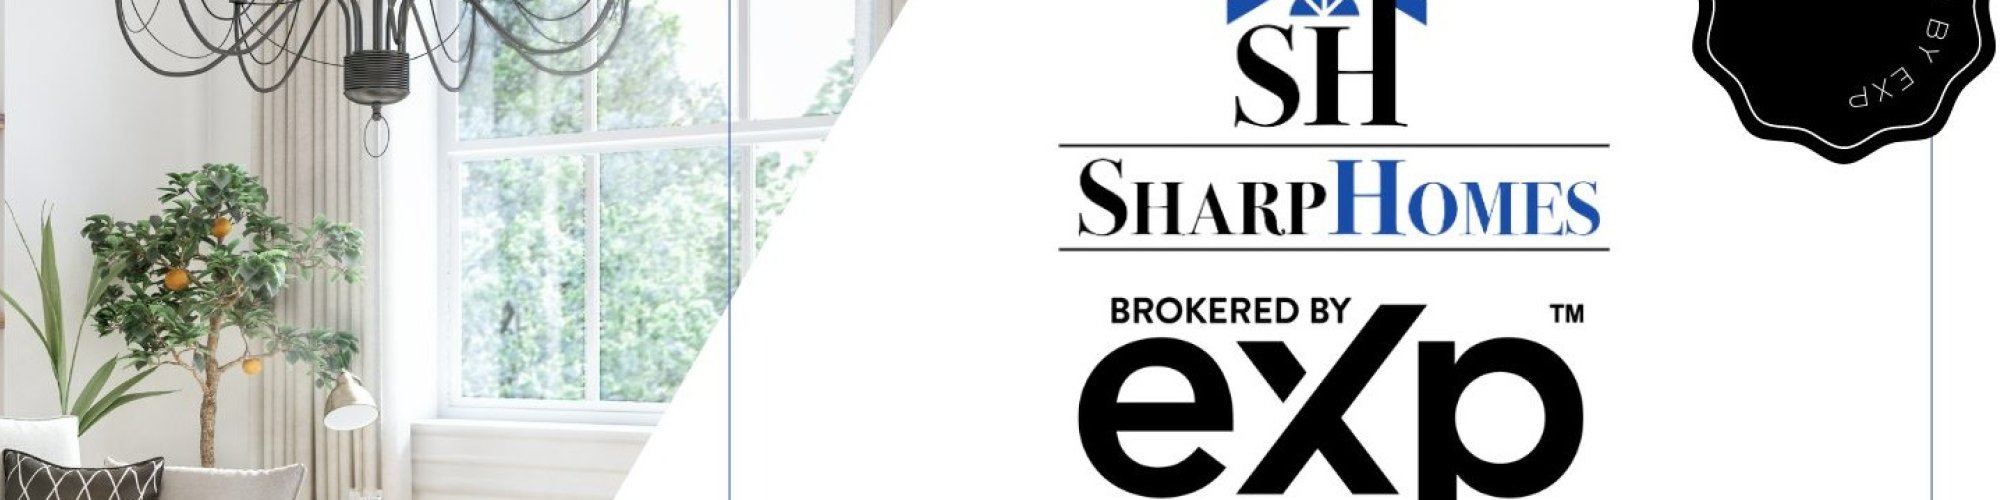 The Sharp Homes Team Brokered By EXP Realty